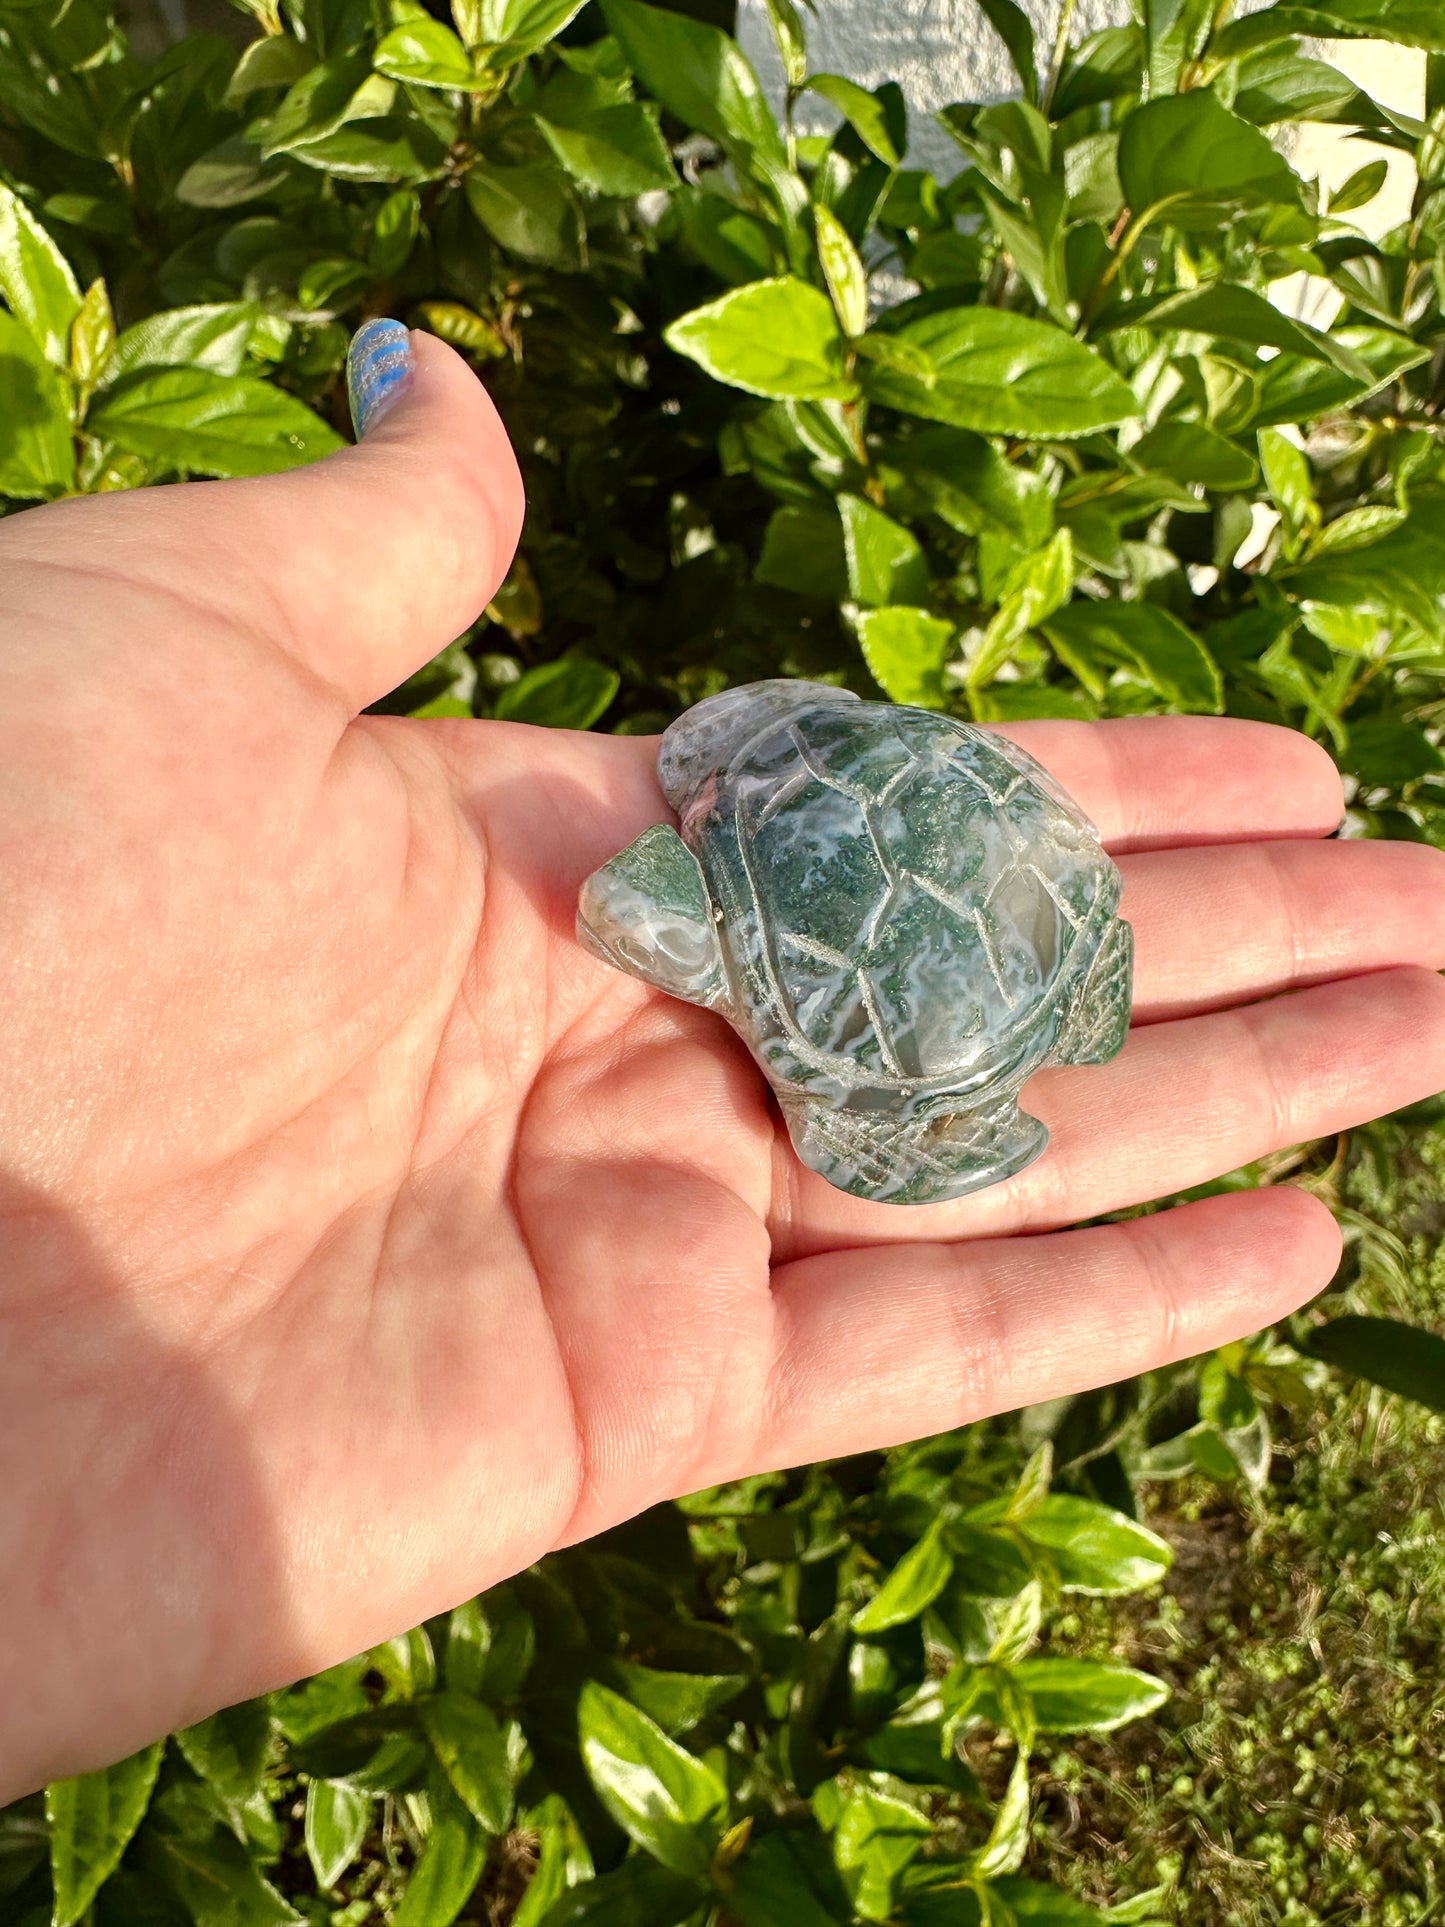 Druzy Moss Agate Turtle Carving - Unique Handcrafted Gemstone Decor for Home and Office, Perfect Gift for Nature and Turtle Lovers